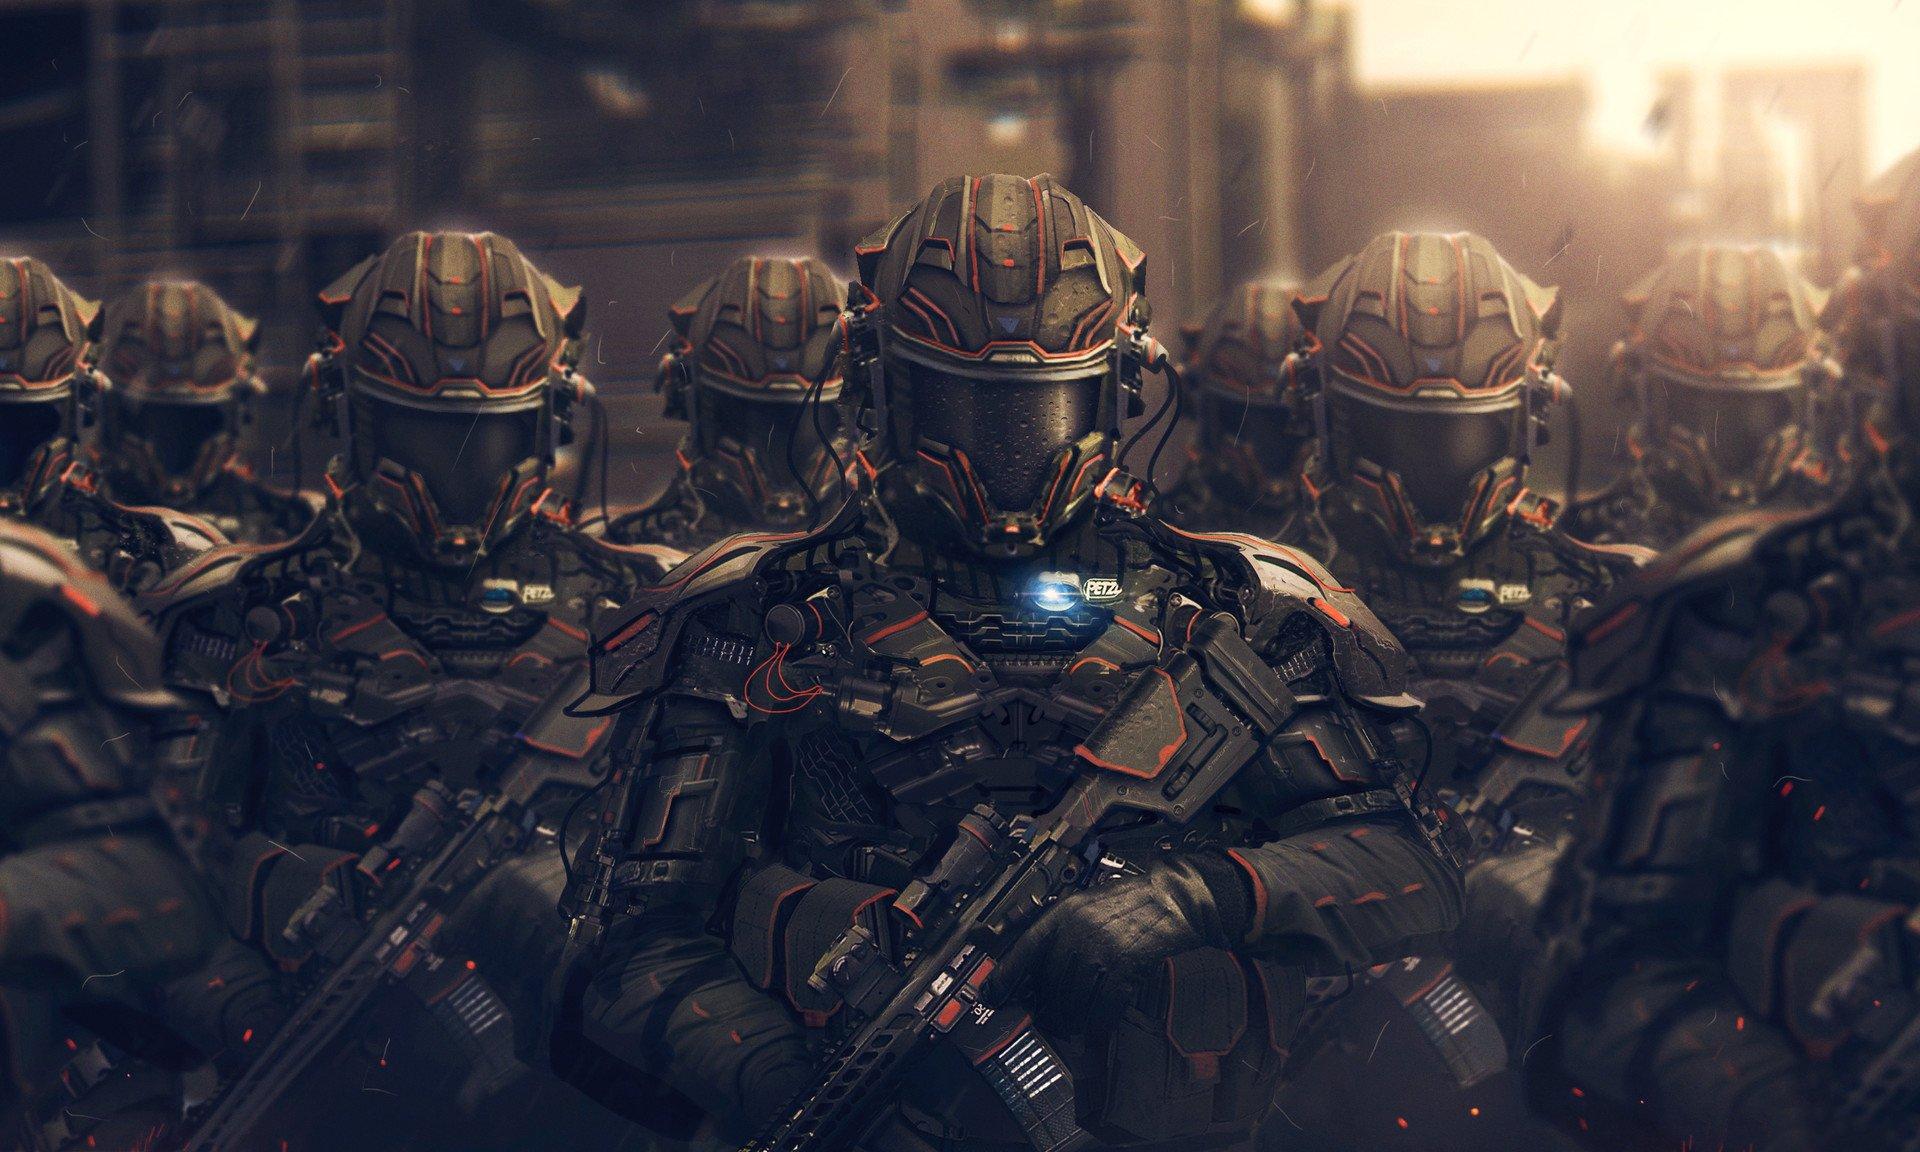 Sci Fi Soldier